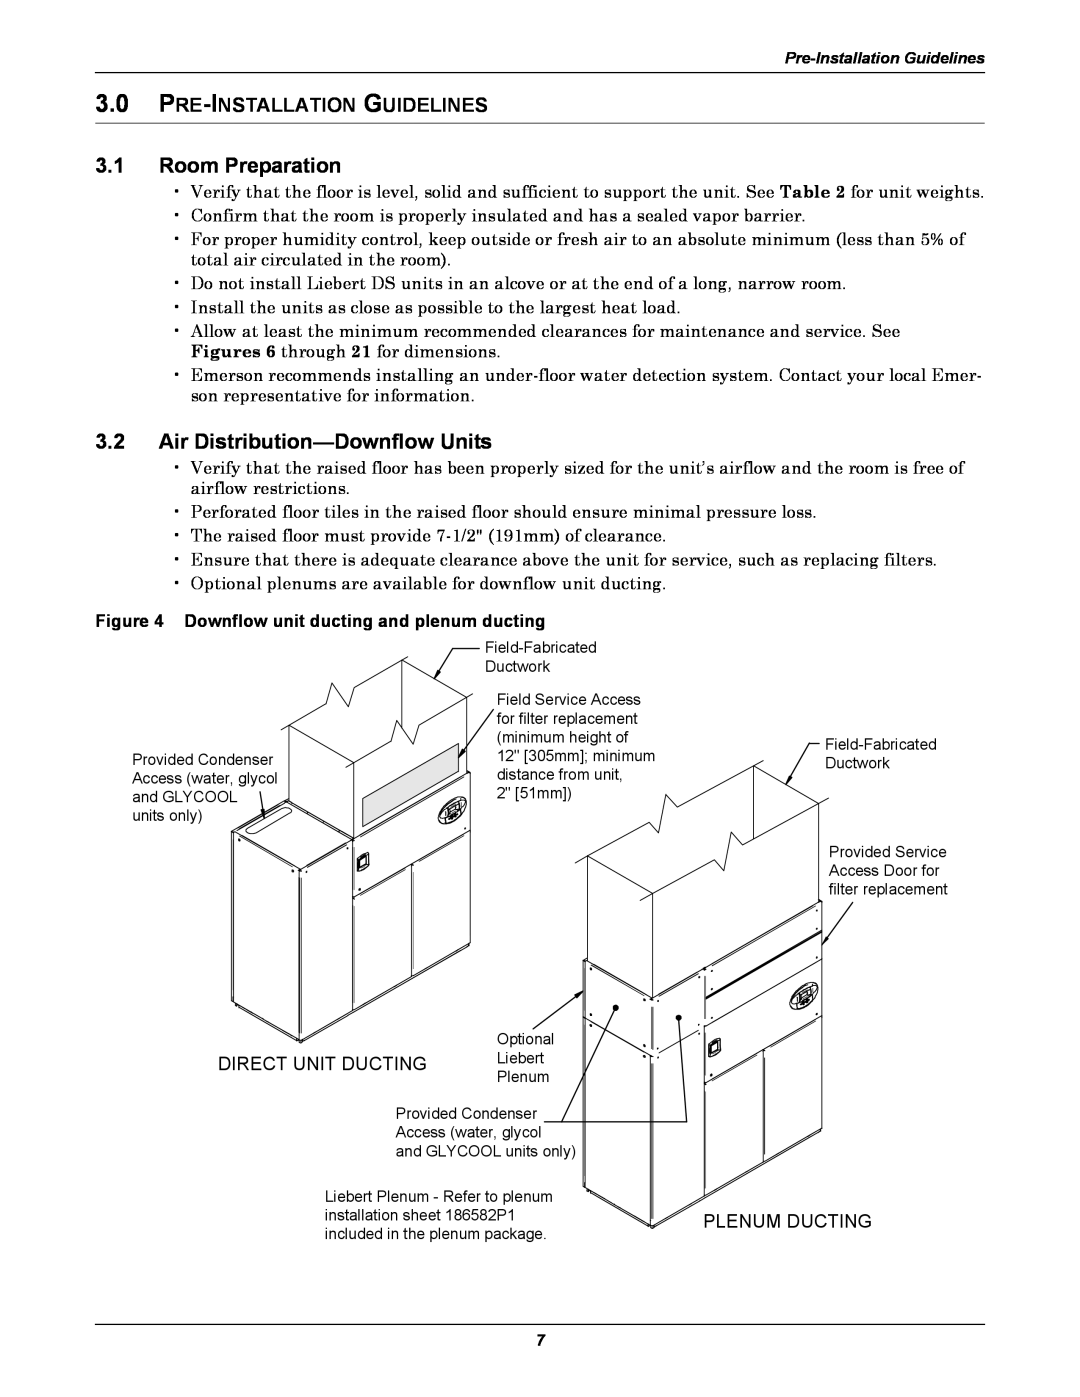 Liebert DS user manual Room Preparation, Air Distribution-Downflow Units, Pre-Installation Guidelines 